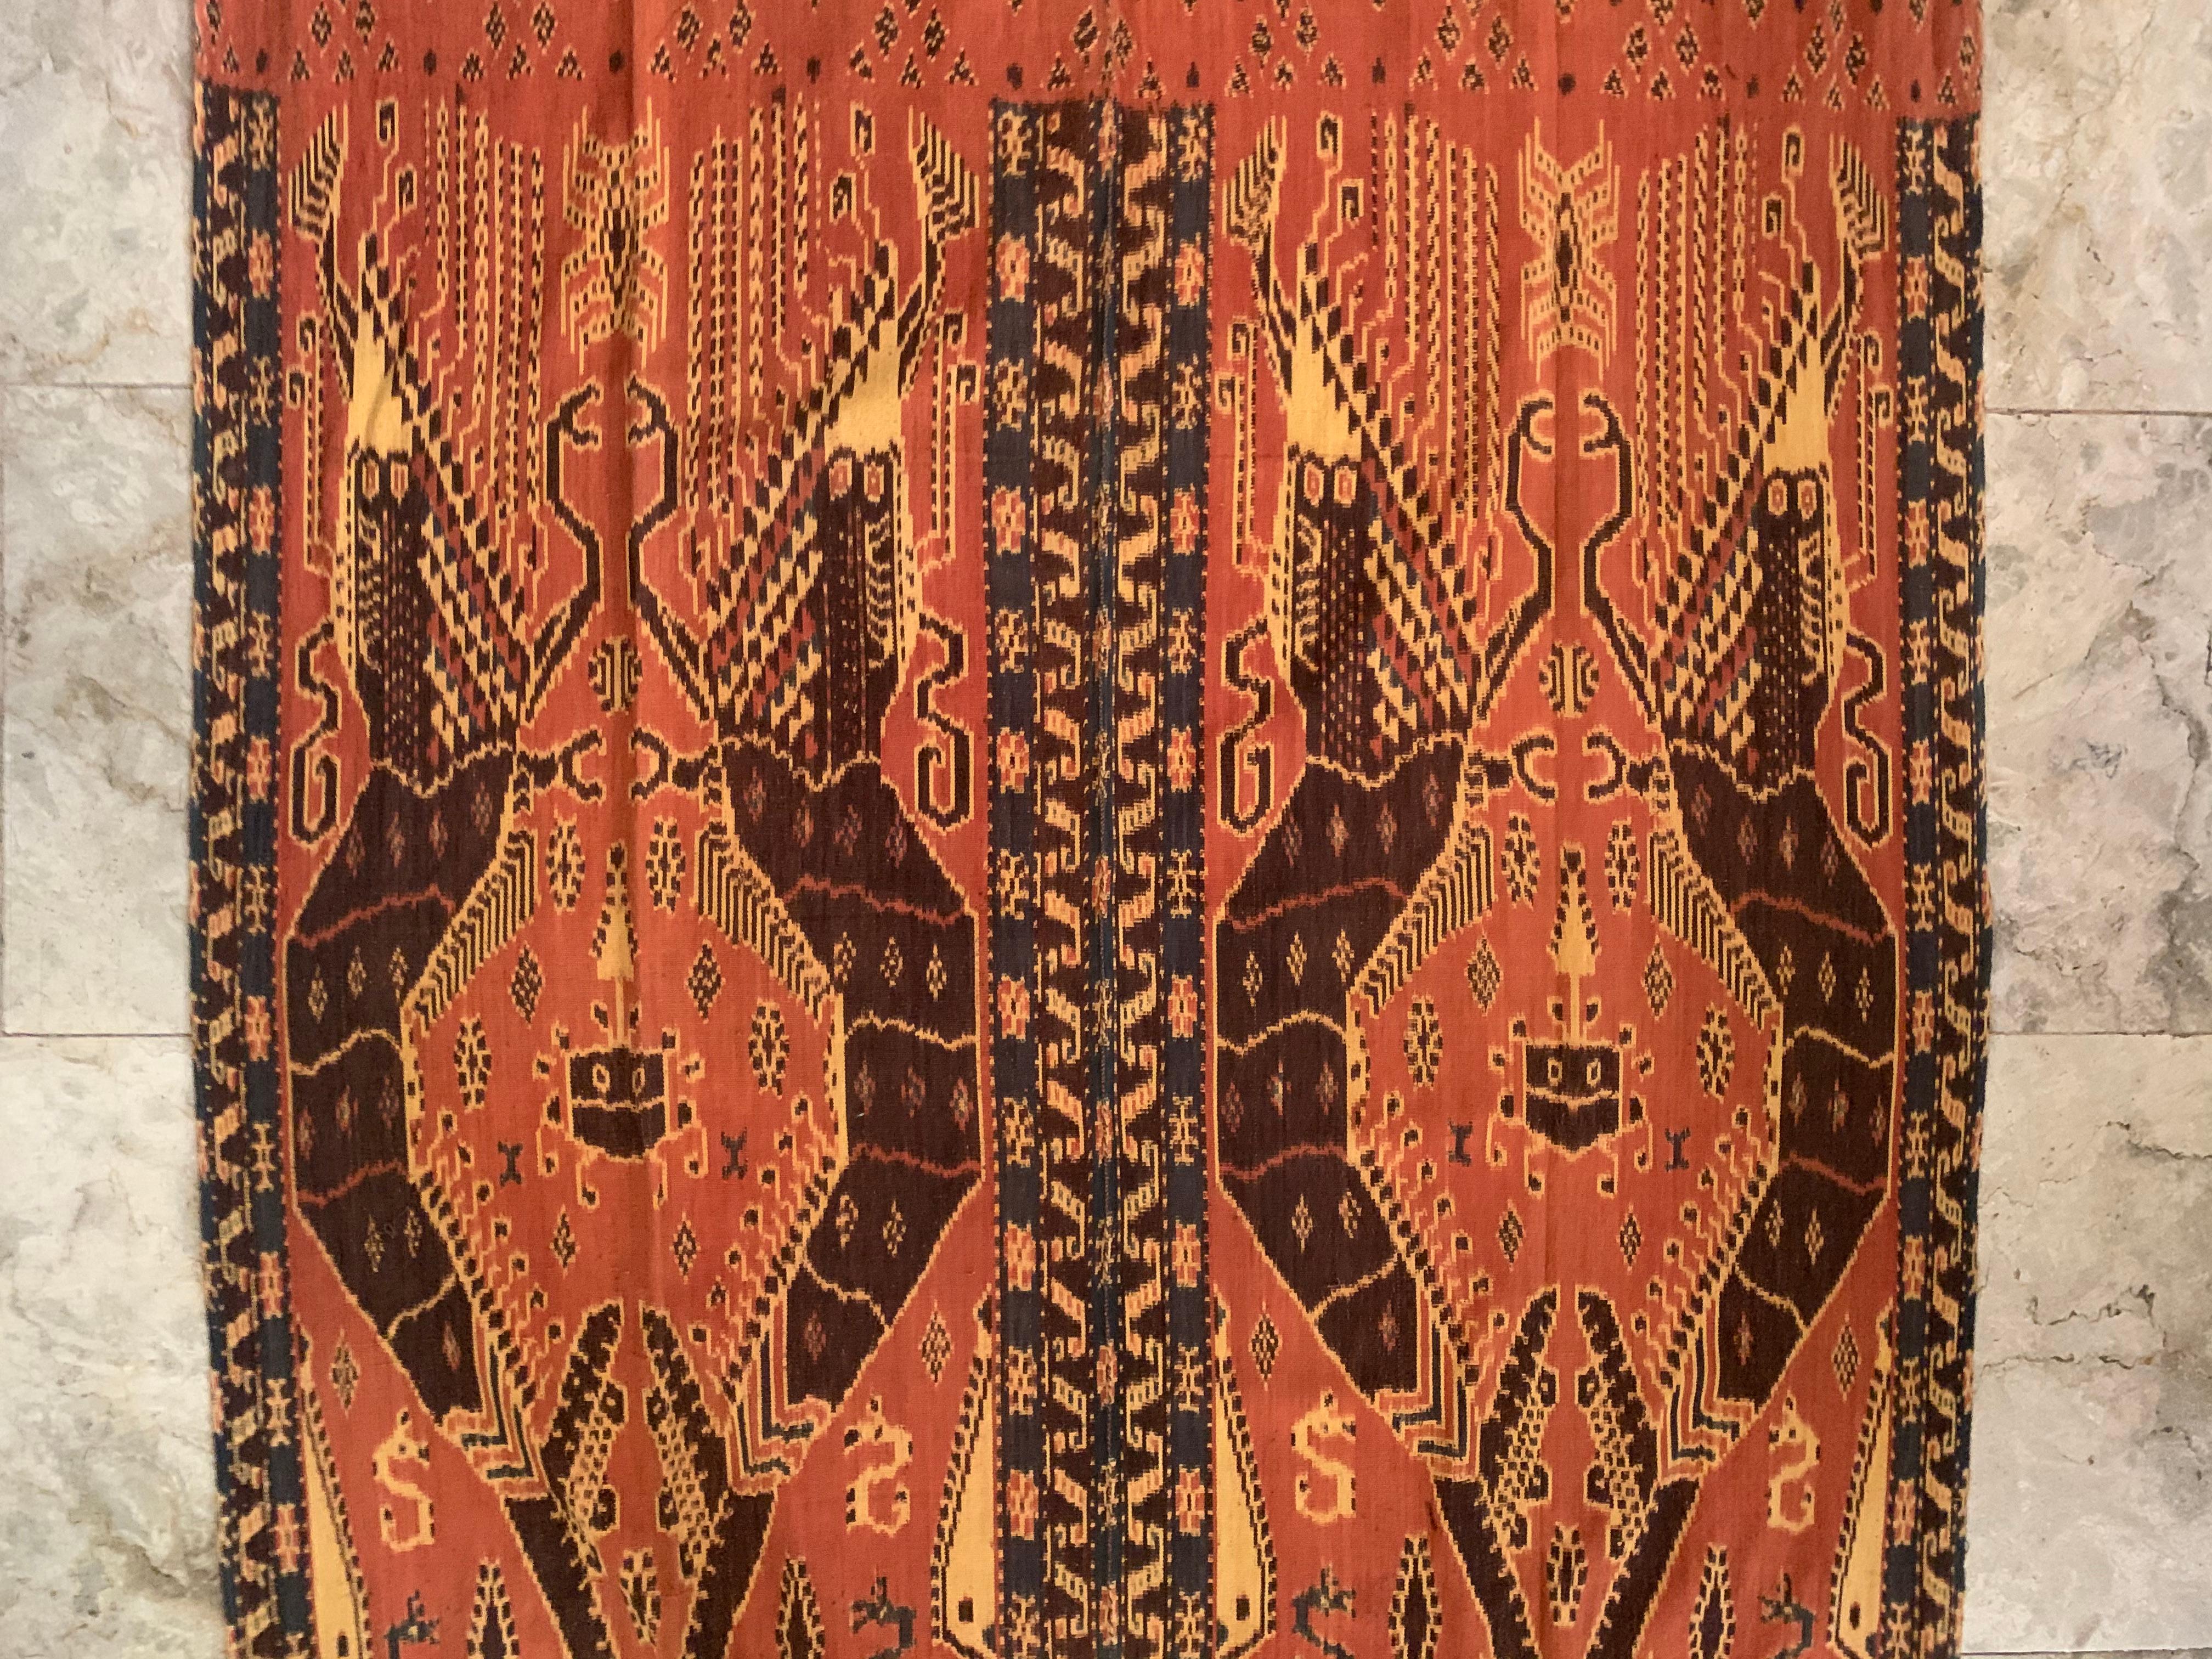 Hand-Woven Ikat Textile from Sumba Island with Stunning Tribal Motifs, Indonesia